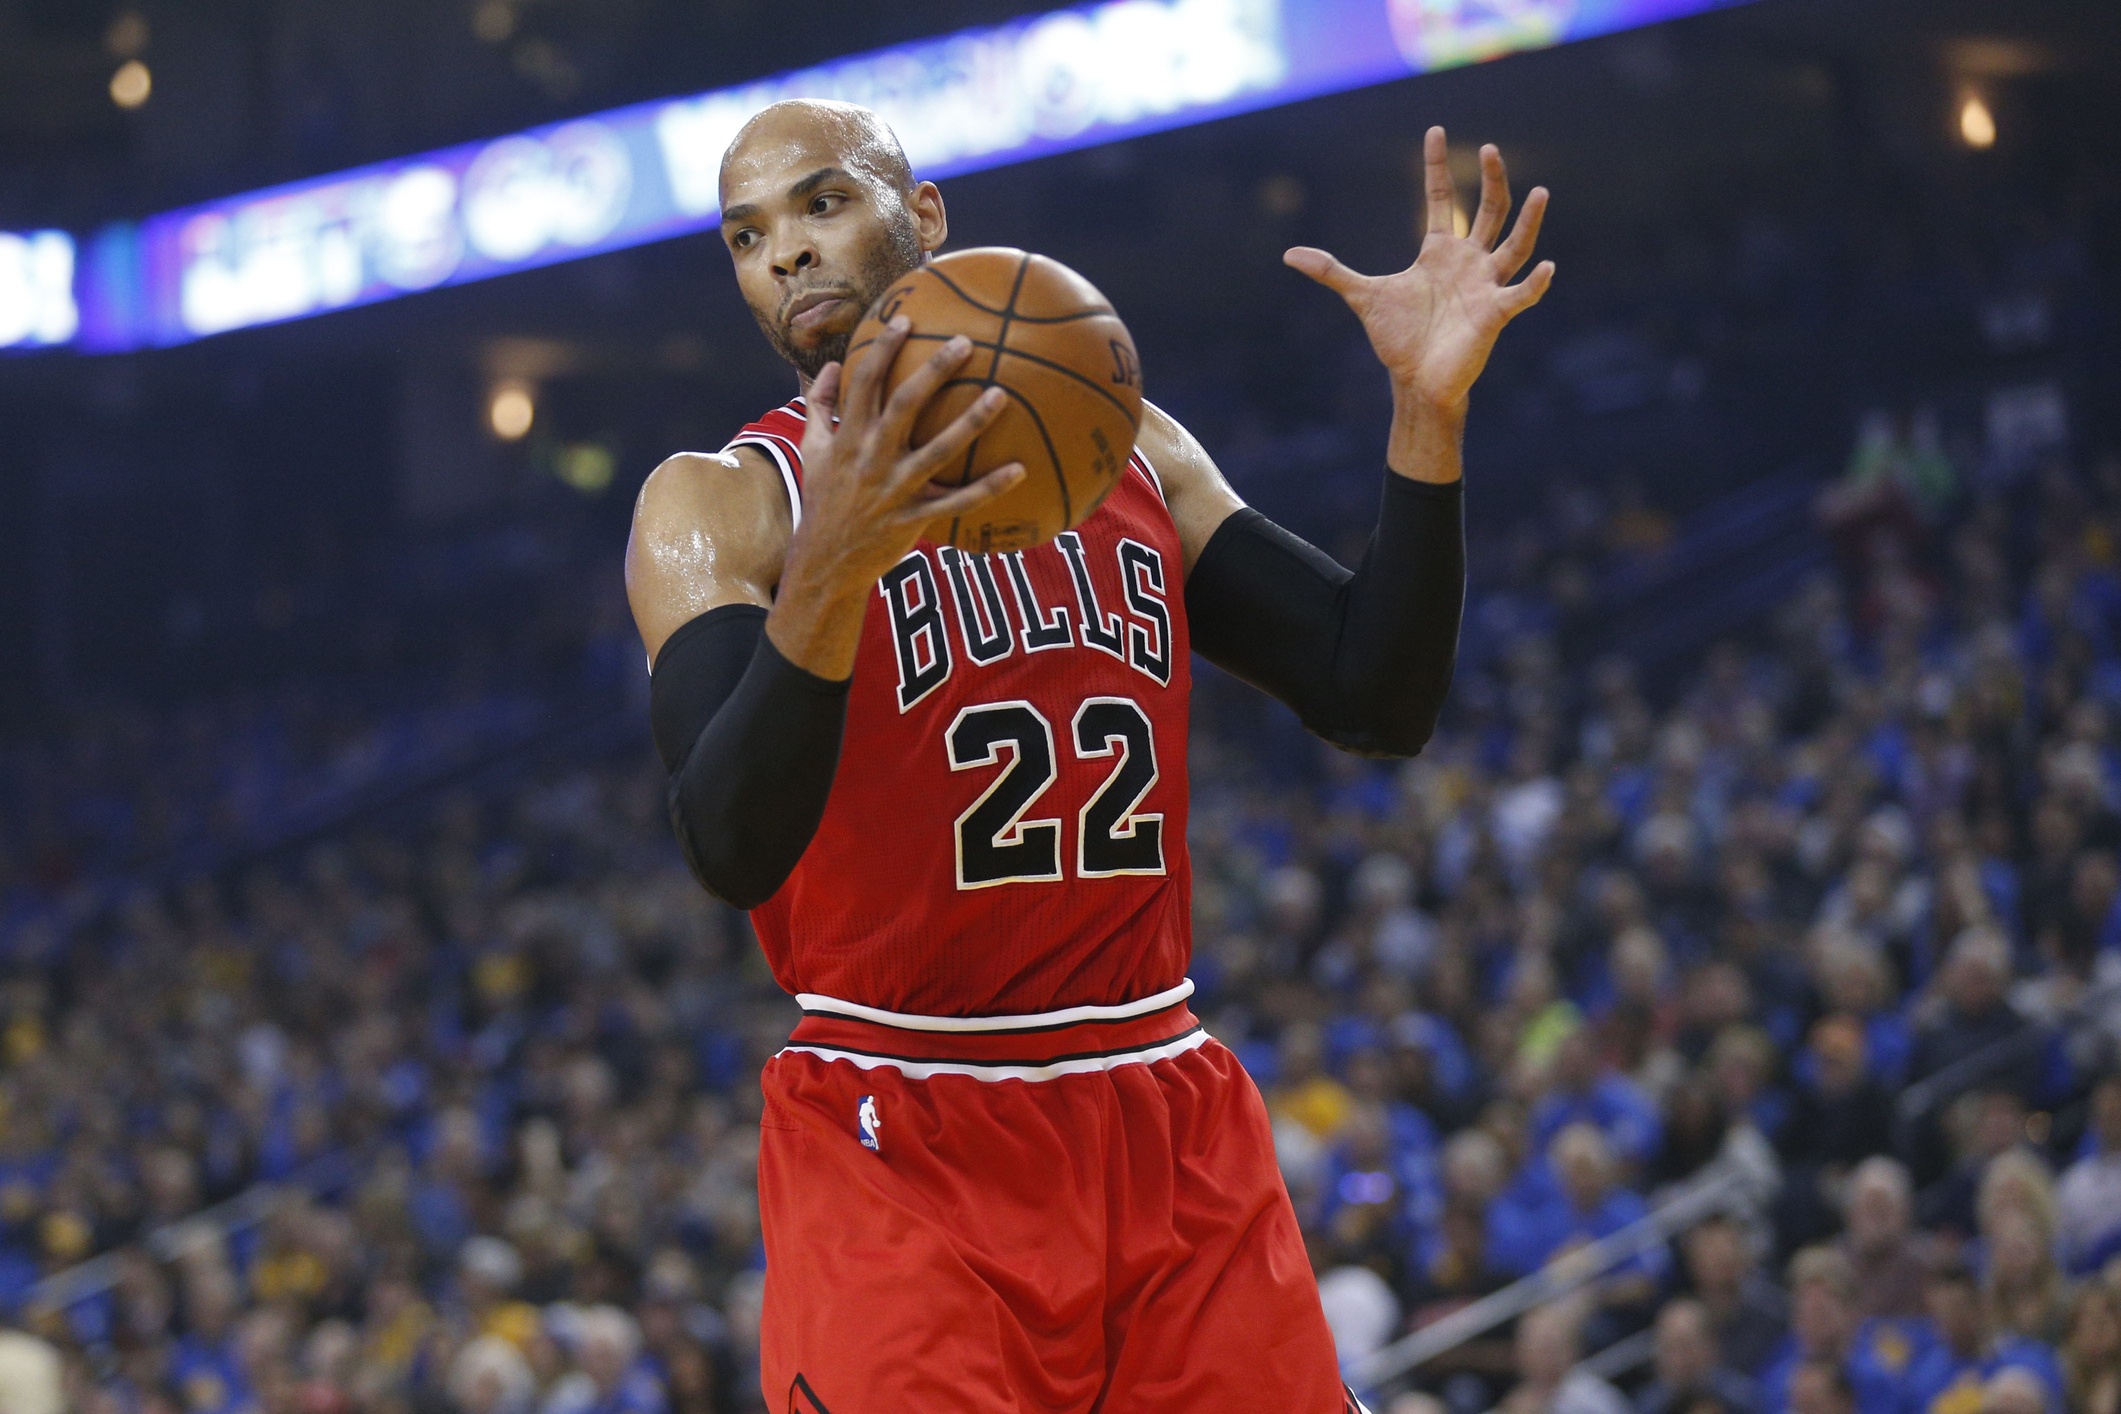 Feb 8, 2017; Oakland, CA, USA; Chicago Bulls forward Taj Gibson (22) holds onto a rebound against the Golden State Warriors in the first quarter at Oracle Arena. Mandatory Credit: Cary Edmondson-USA TODAY Sports